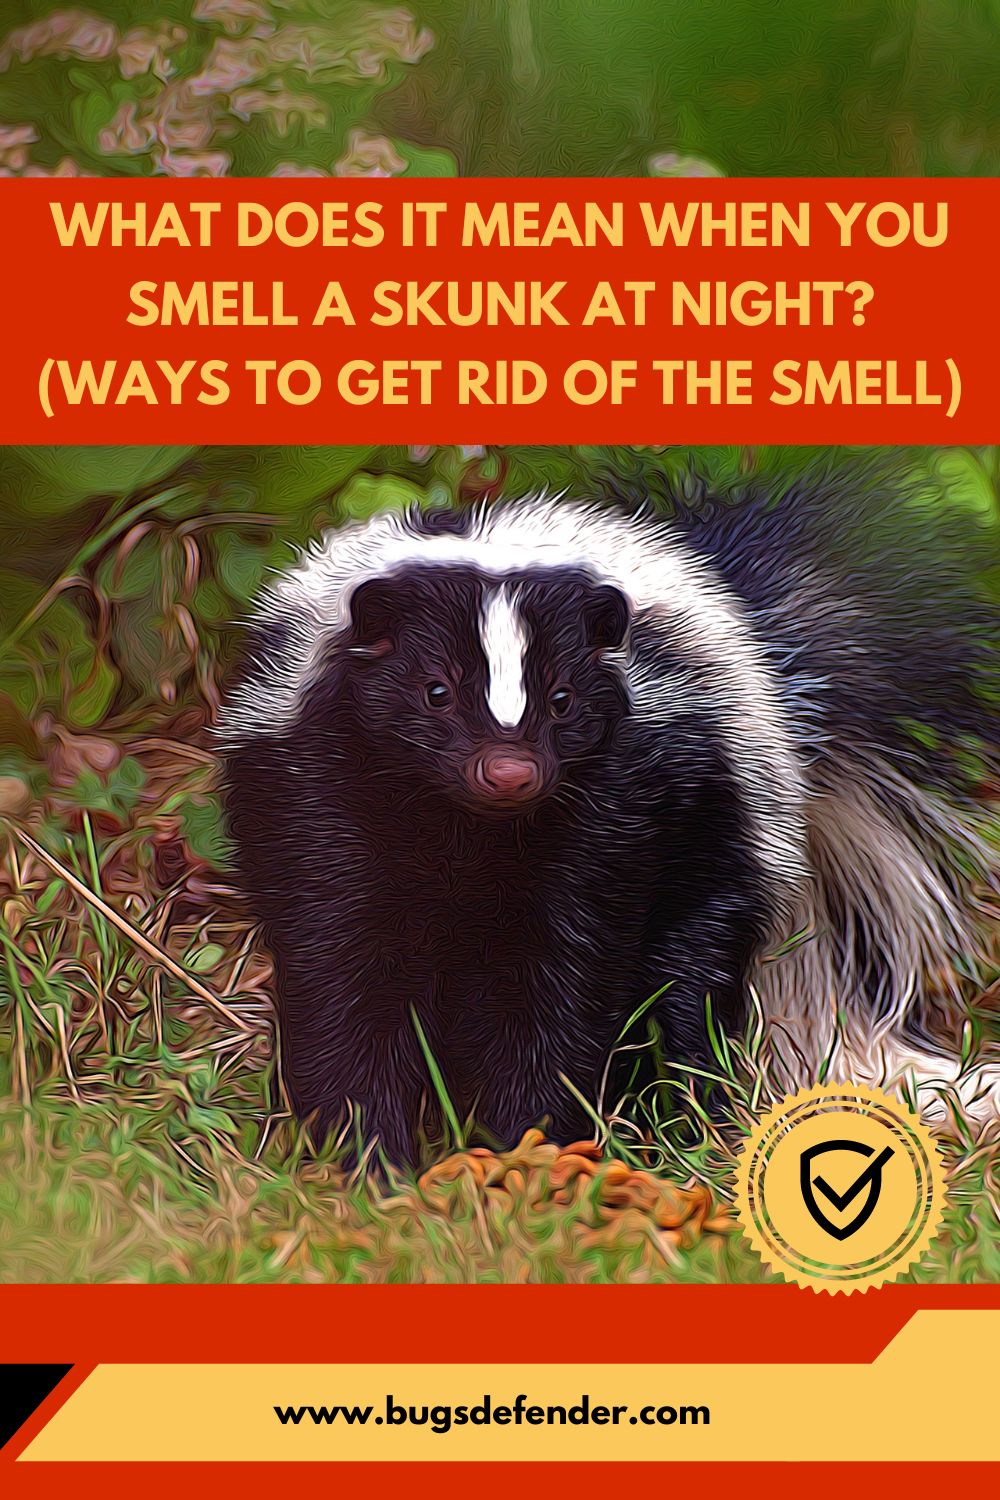 What Does It Mean When You Smell A Skunk At Night? (Ways To Get Rid Of The Smell) pin 2